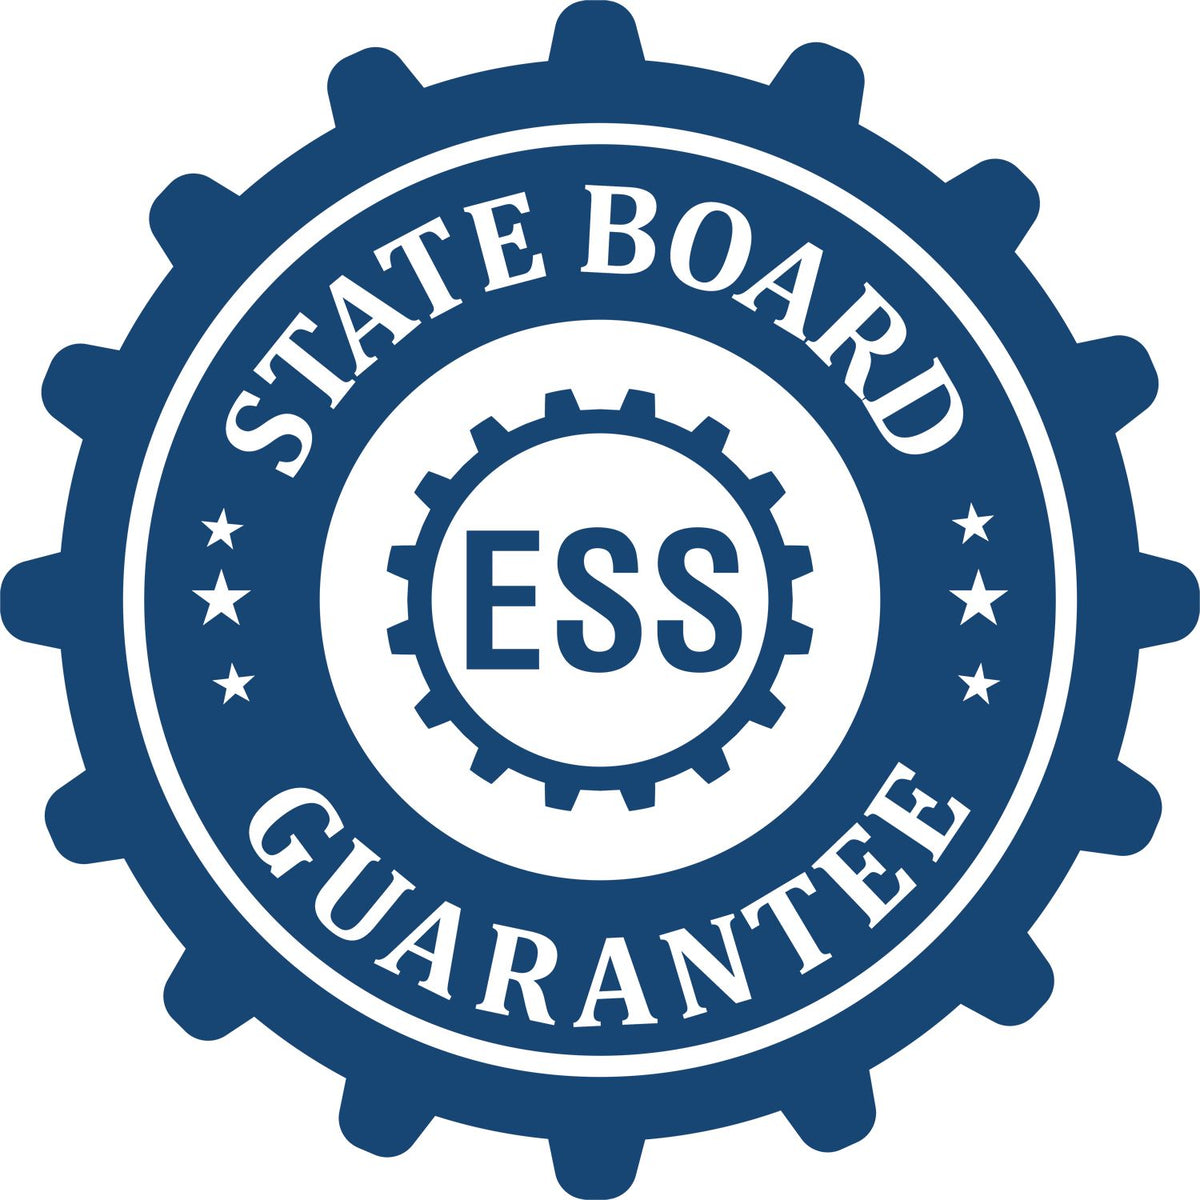 An emblem in a gear shape illustrating a state board guarantee for the Heavy-Duty Texas Rectangular Notary Stamp product.